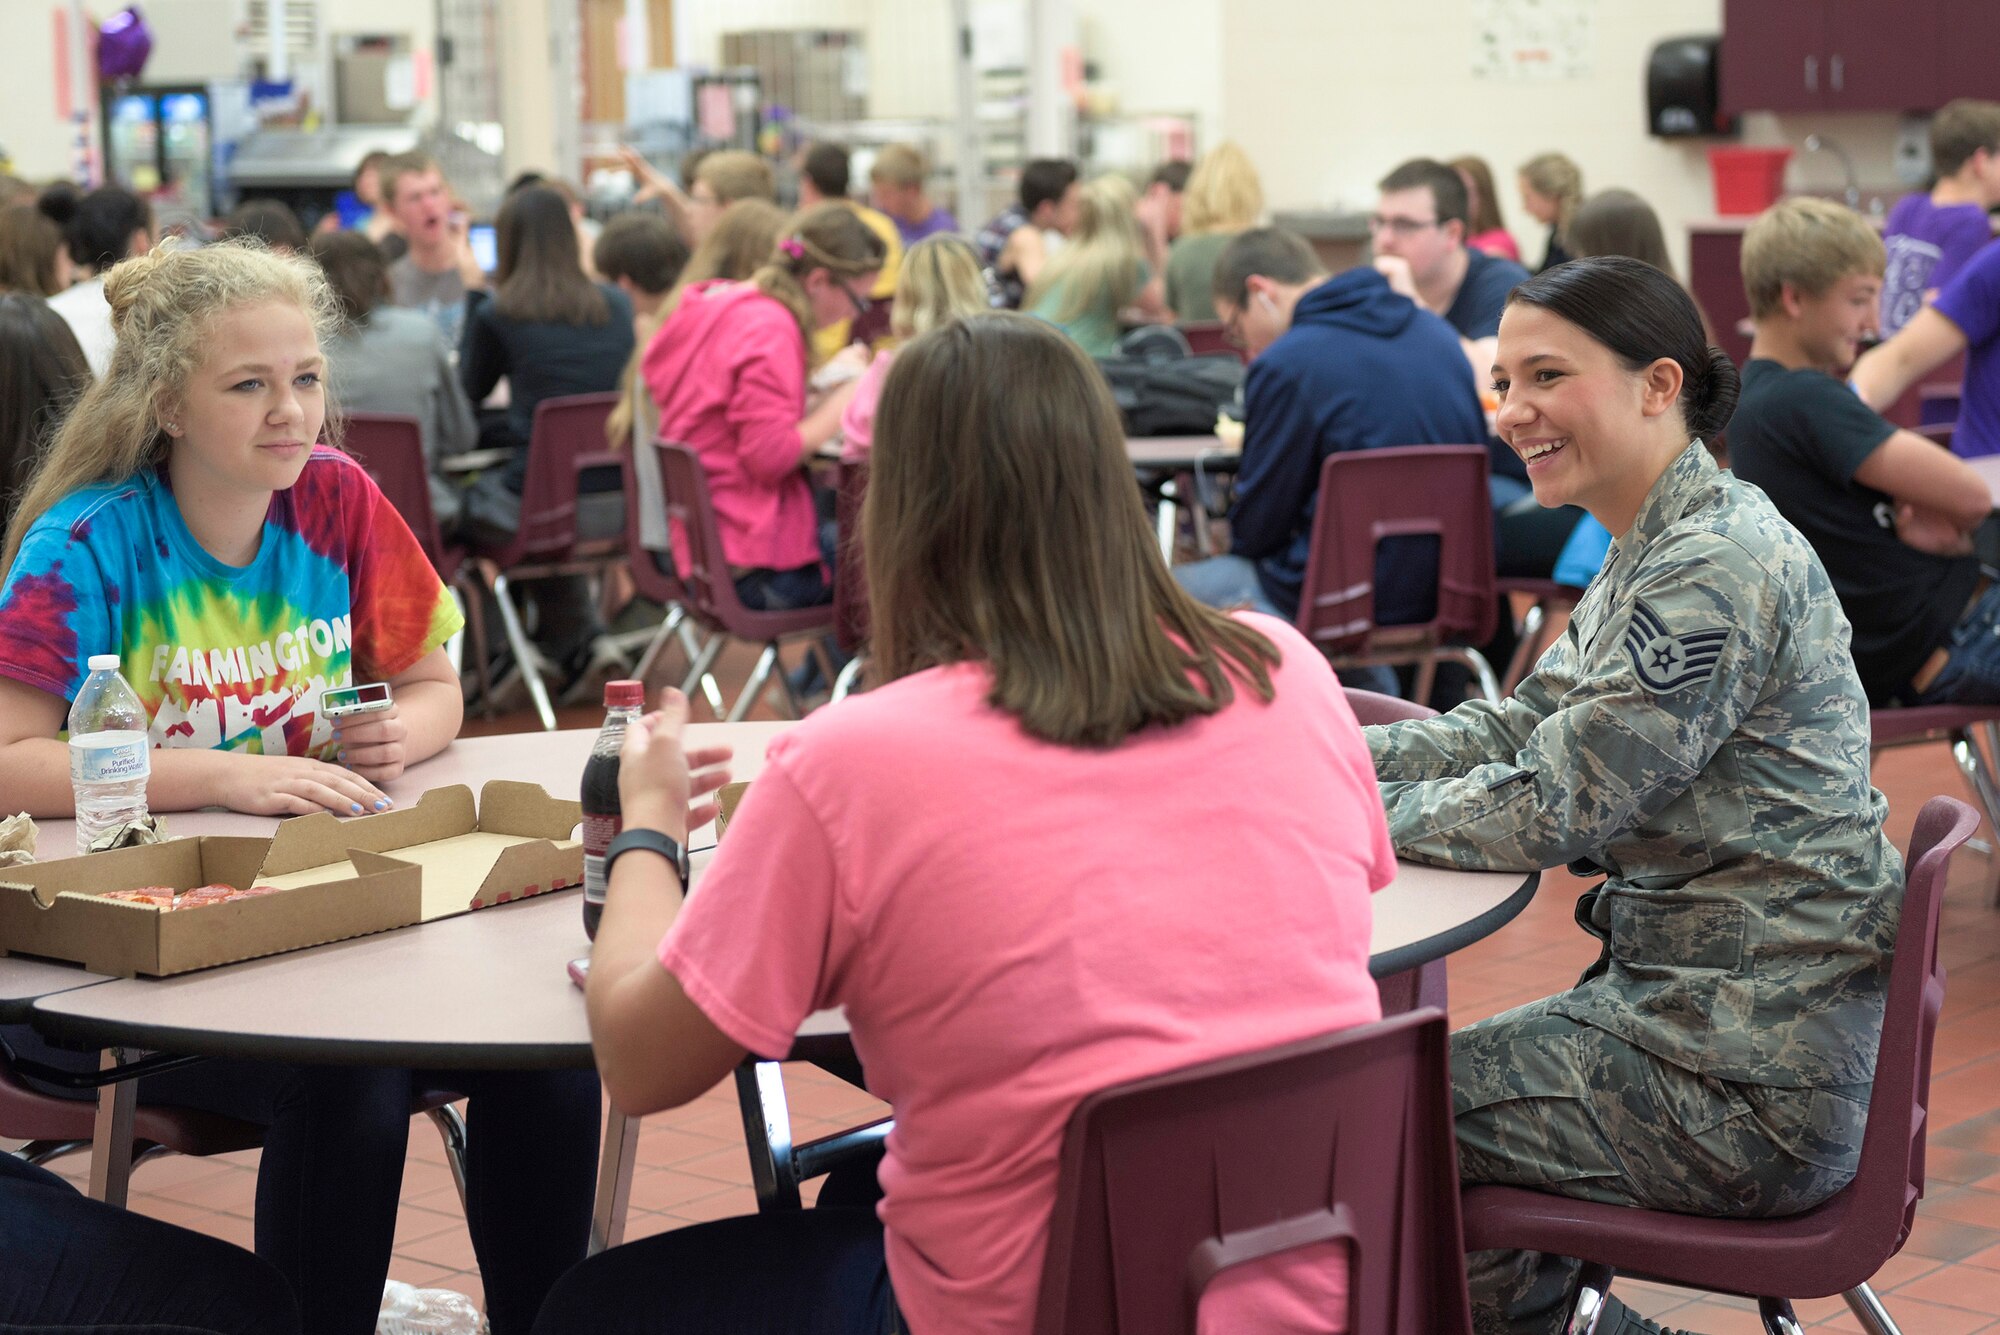 U.S. Air Force Staff Sgt. Rachael L. Blasko, an enlisted accessions recruiter with the 182nd Force Support Squadron, Illinois Air National Guard, visits students while recruiting at Farmington Central High School in Farmington, Ill., May 11, 2016. Blasko is the unit’s newest recruiter and has been serving in that role for two years. (U.S. Air National Guard photo by Staff Sgt. Lealan Buehrer)